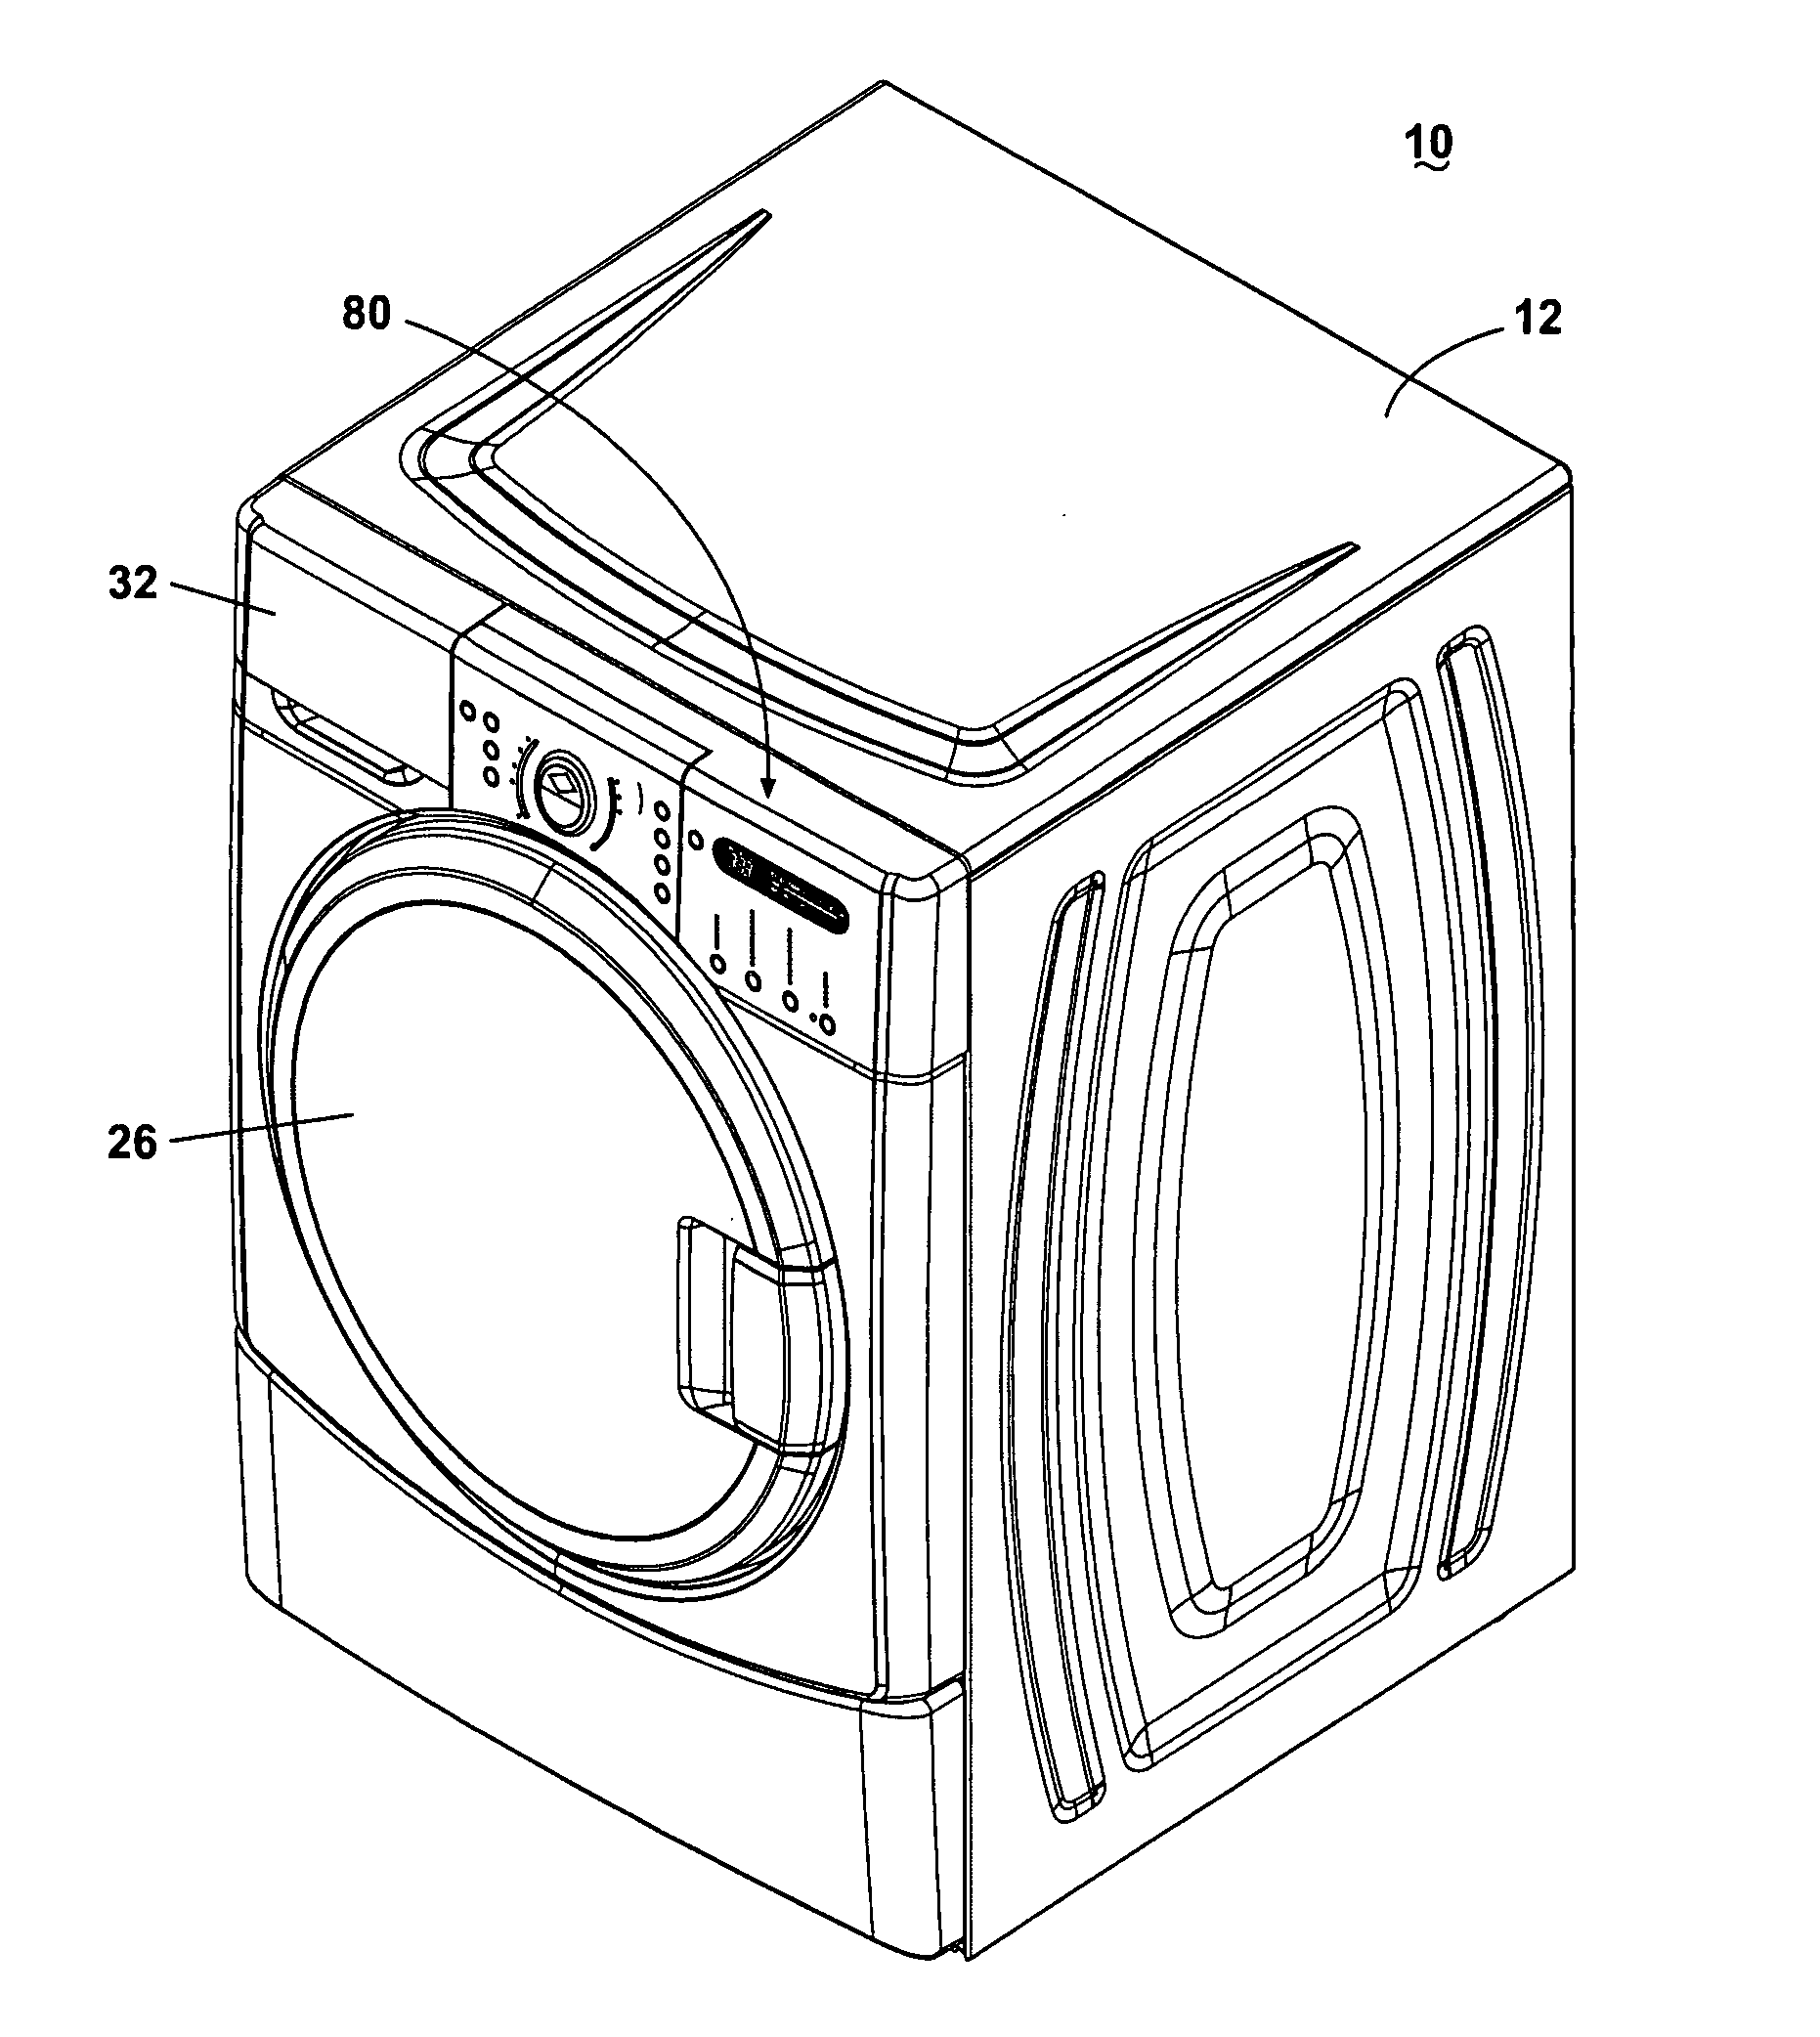 Fabric Treatment Appliance with Steam Generator Having a Variable Thermal Output